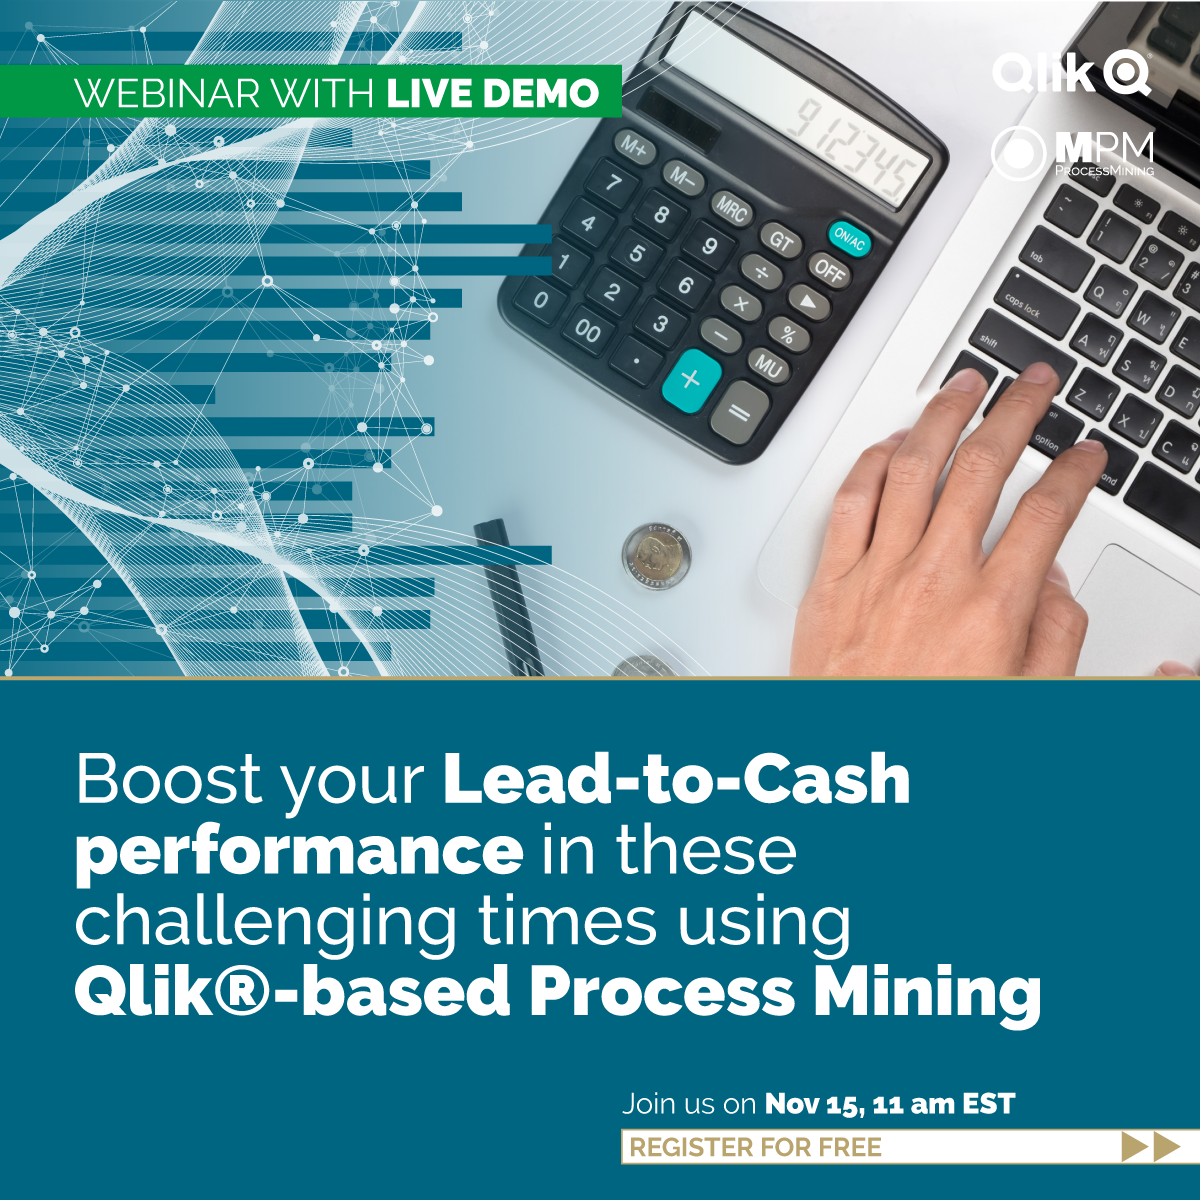 Boost your Lead-to-Cash performance in these challenging times using Qlik-based Process Mining